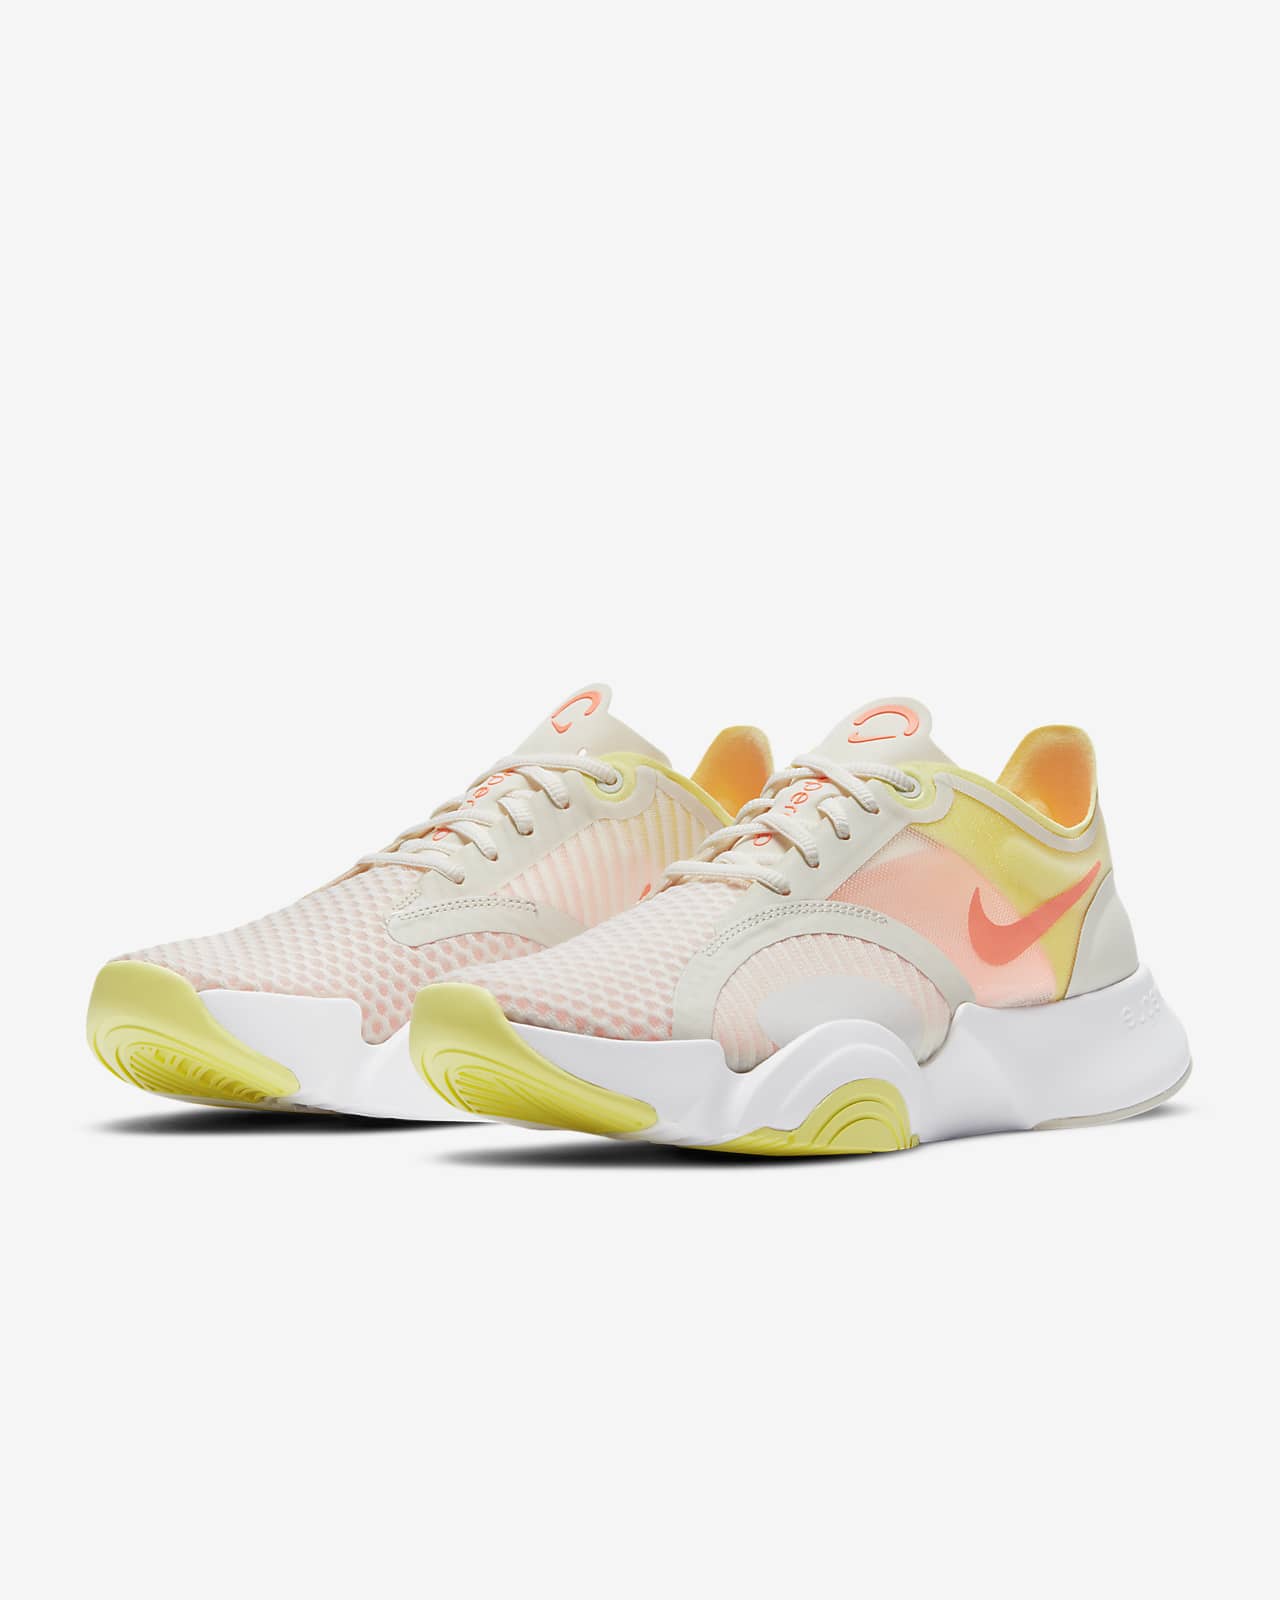 nike training superrep go trainers in neon green